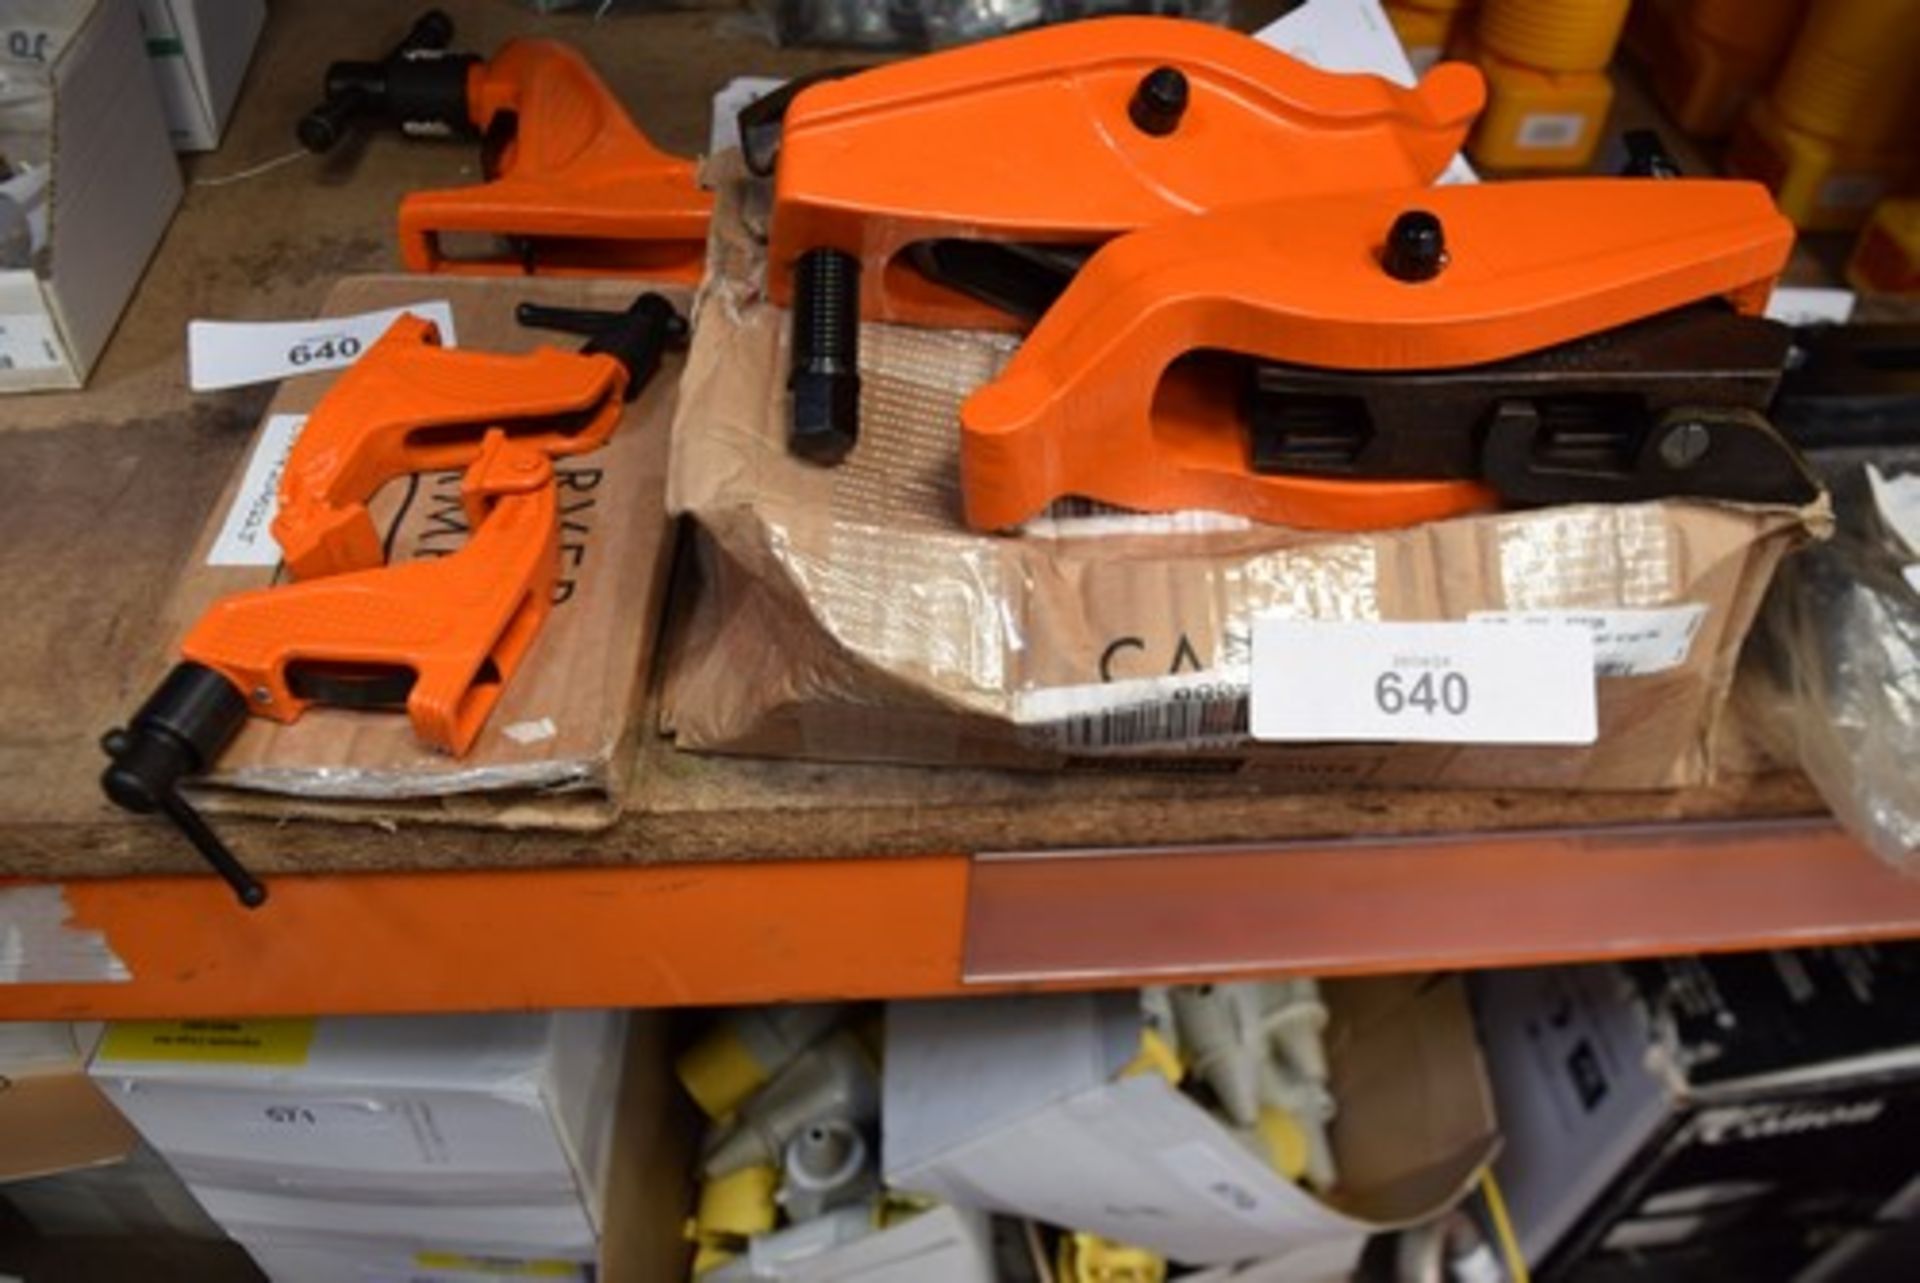 4 x Carver T402 tee slot clamps (head only), 2 x Carver T 186.900 bar clamps and Carver heavy duty c